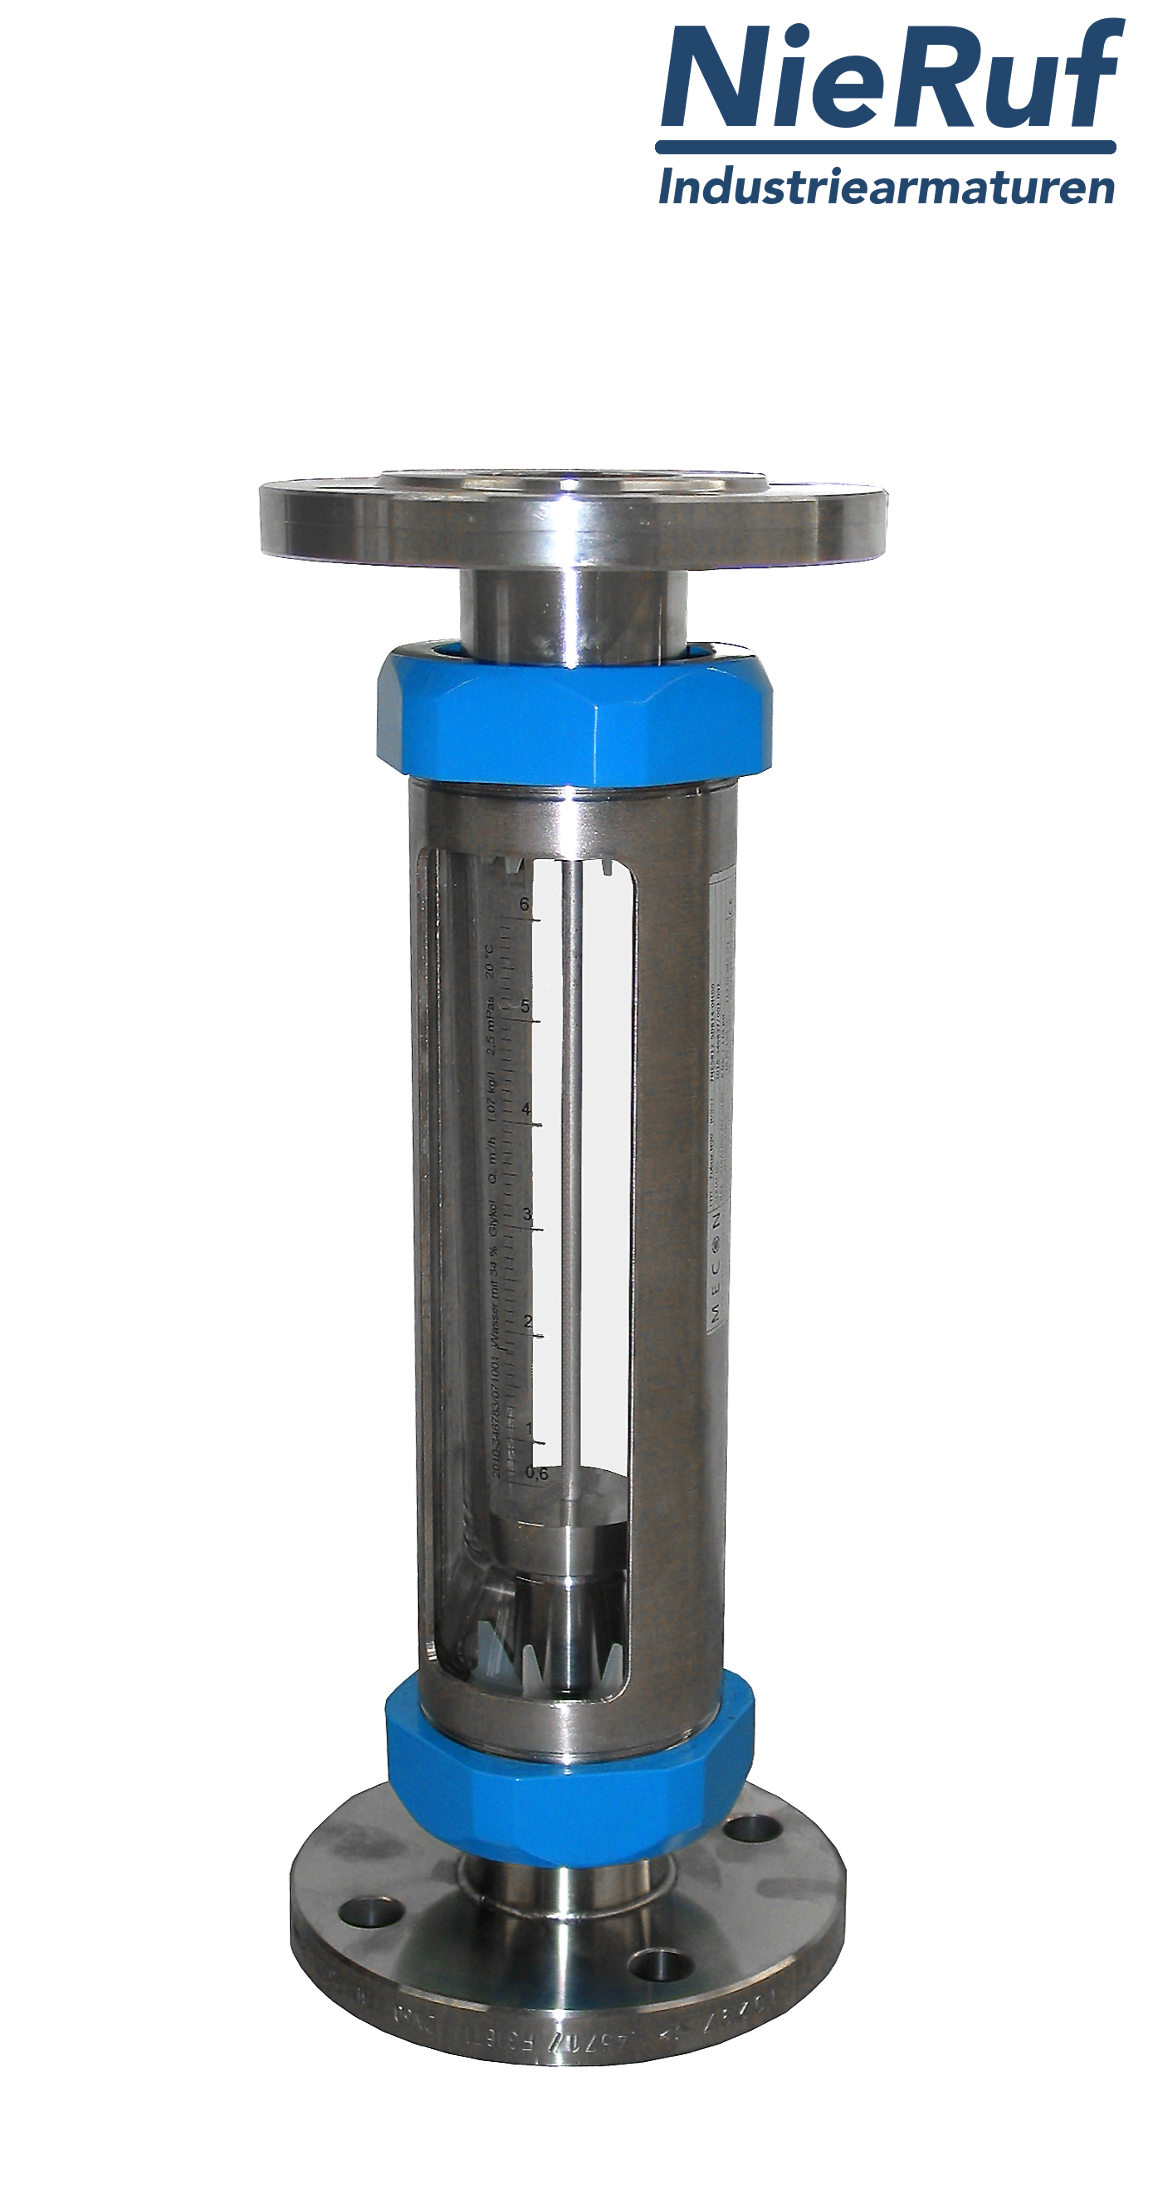 Variable area flowmeter stainless steel + borosilicate flange DN40 400.0 - 4000 l/h water FKM